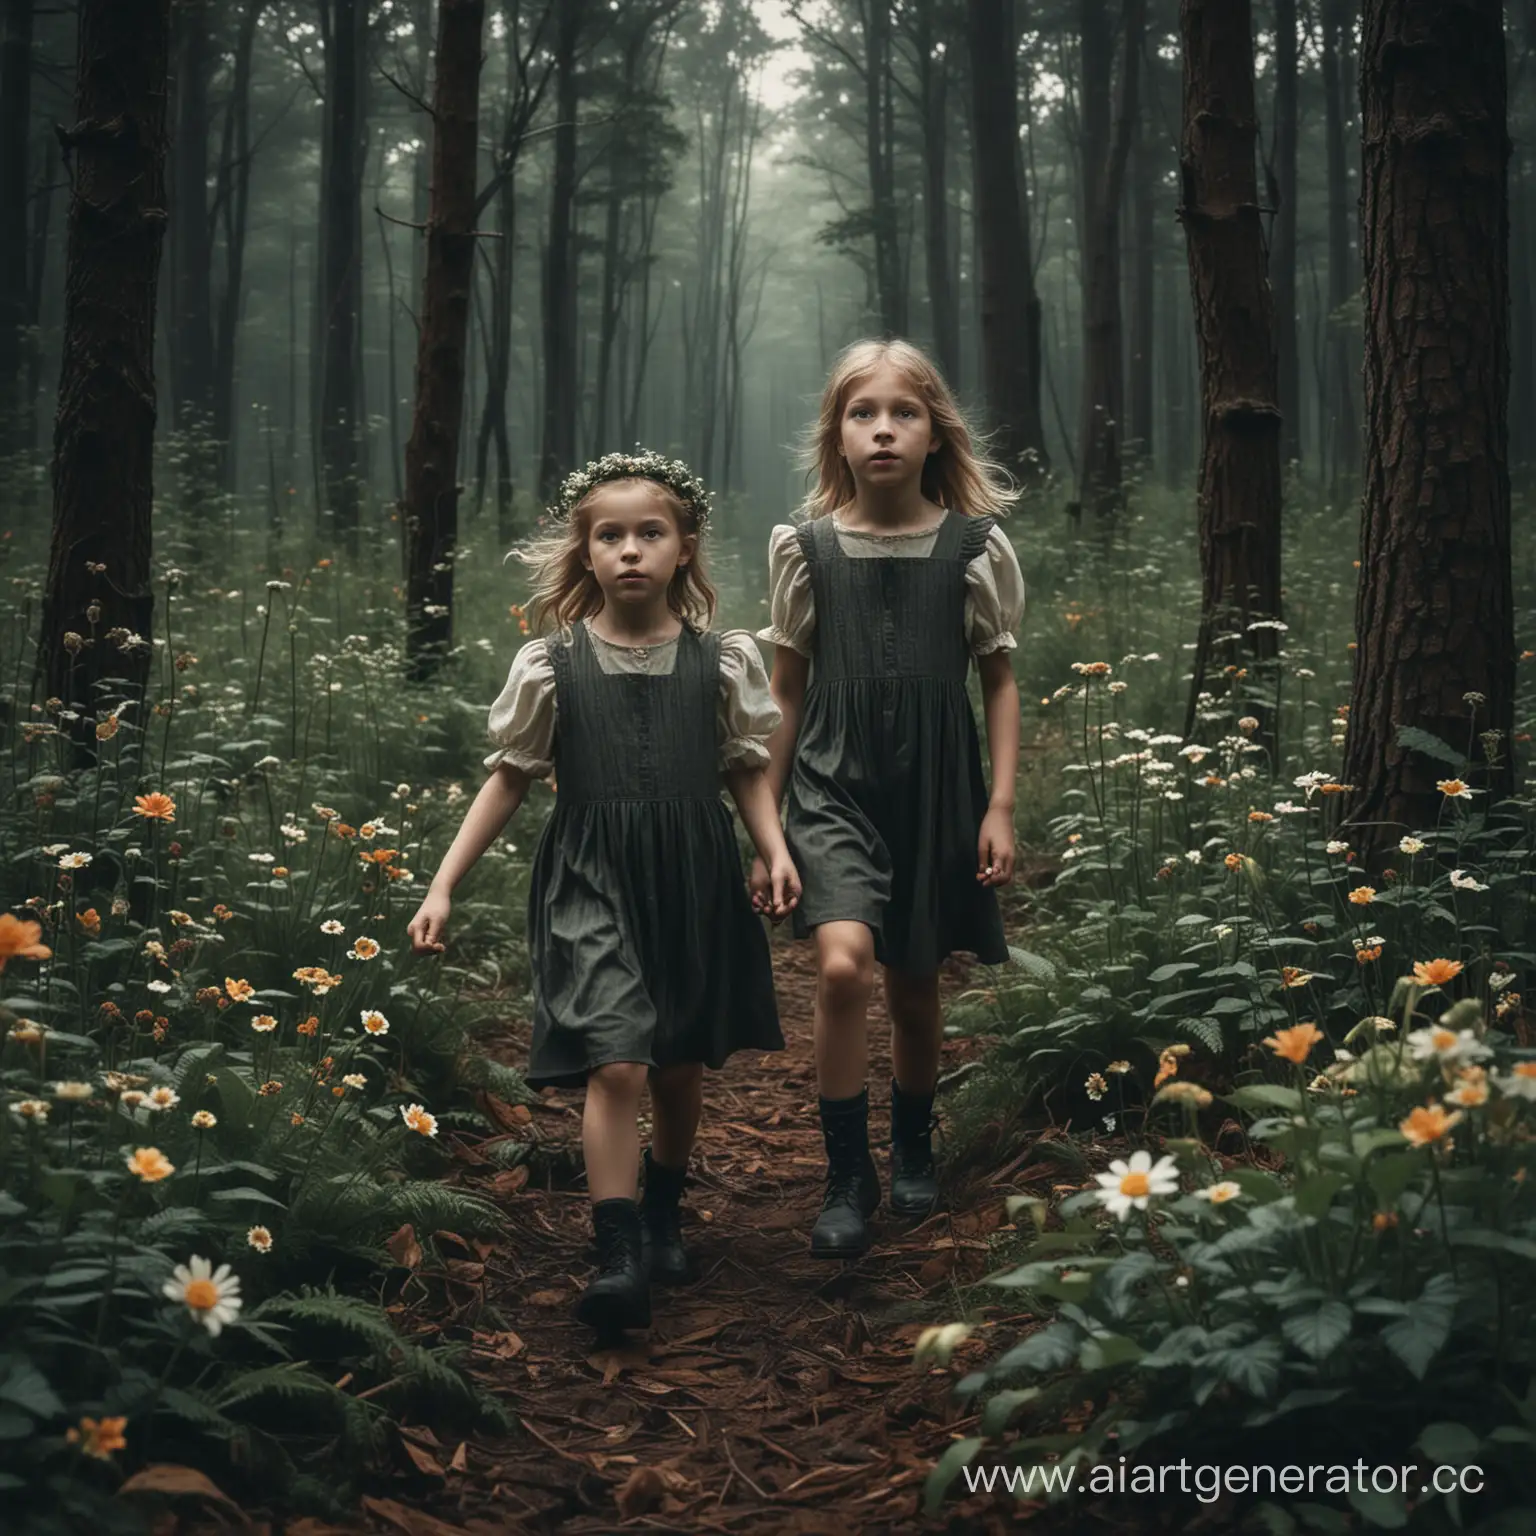 Enchanted-Forest-Adventure-Children-Exploring-Amidst-Floral-Mysteries-in-HighQuality-Y2K-Style